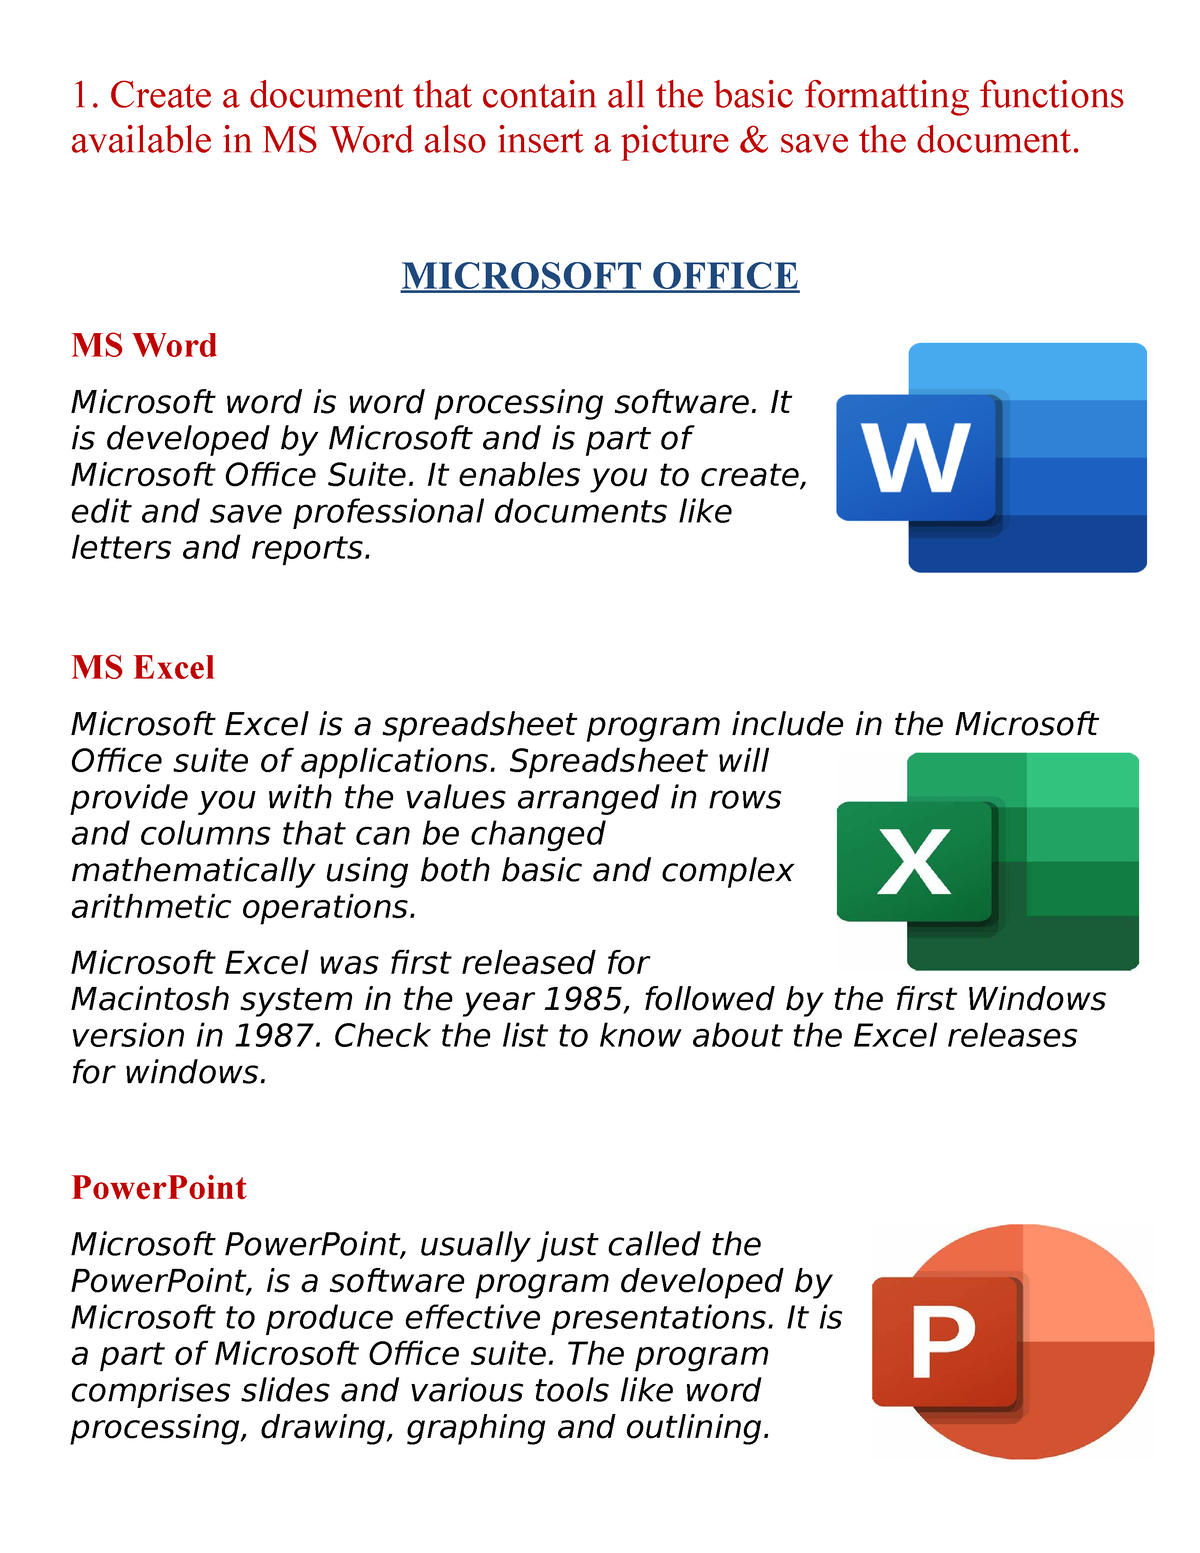 Microsoft Office - Good material for study - 1. Create a document that  contain all the basic - Studocu